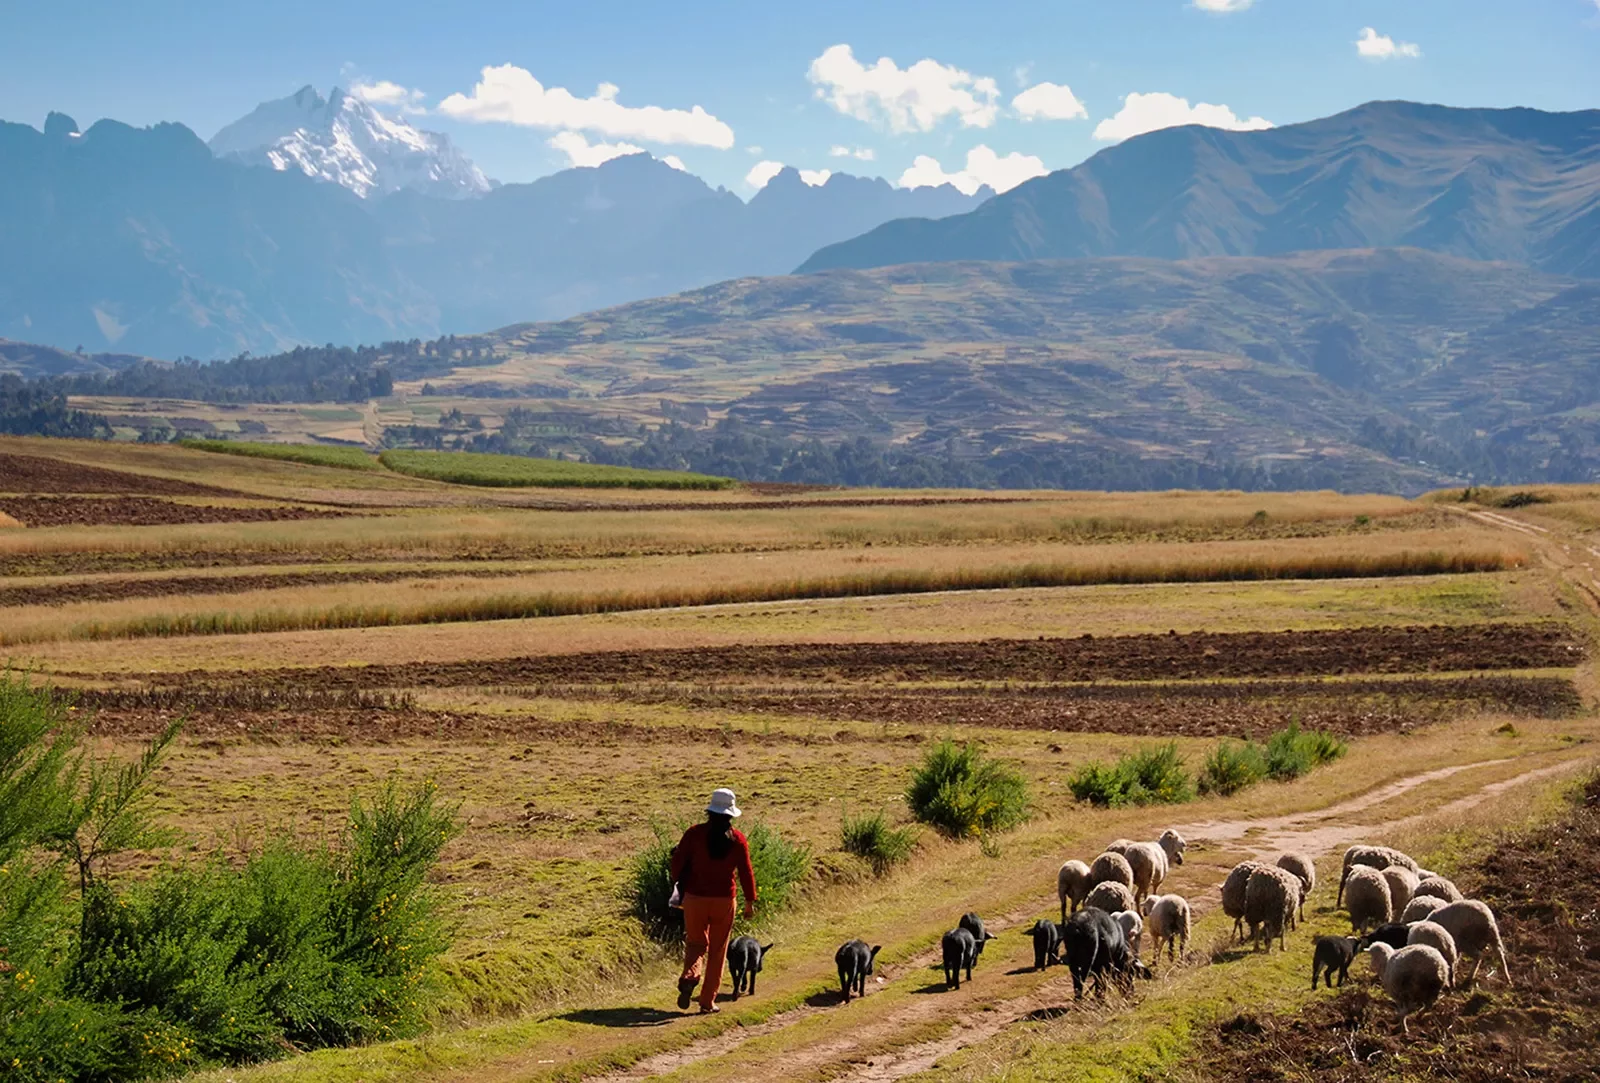 Shot of local shepherd w/ sheep, red dirt vista, mountains in distance.